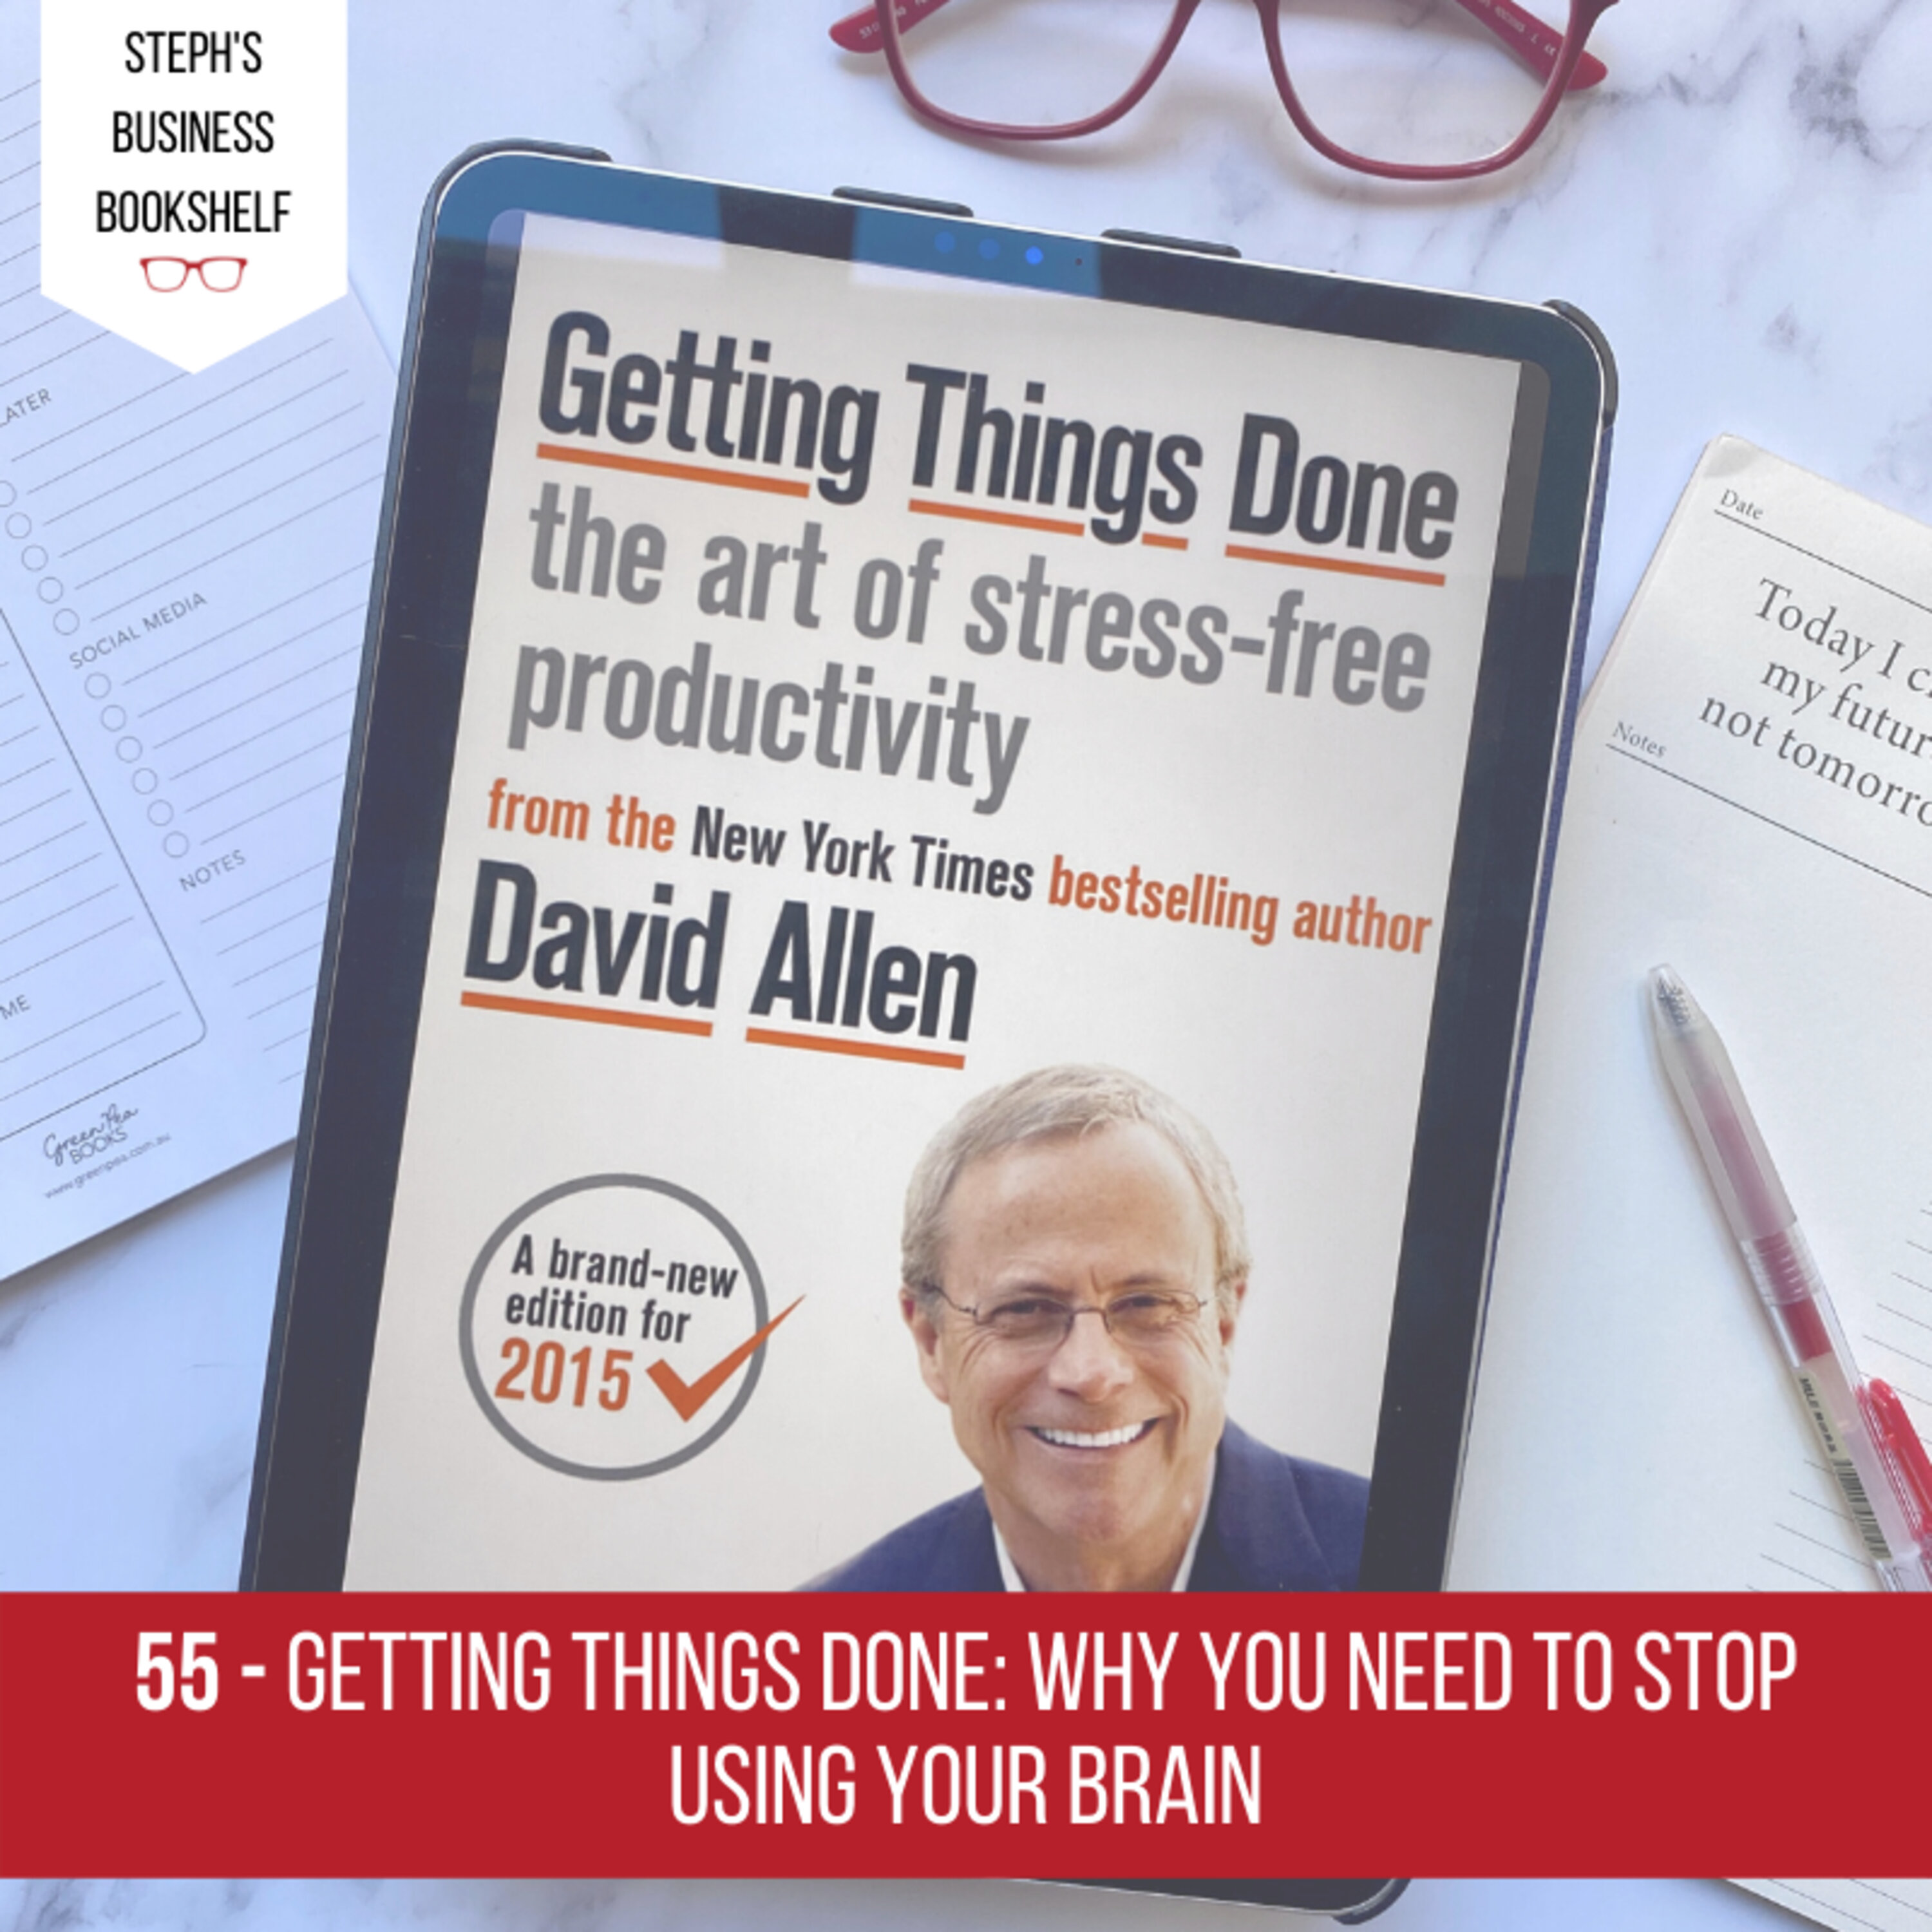 Getting Things Done by David Allen: why you need to stop using your brain Image